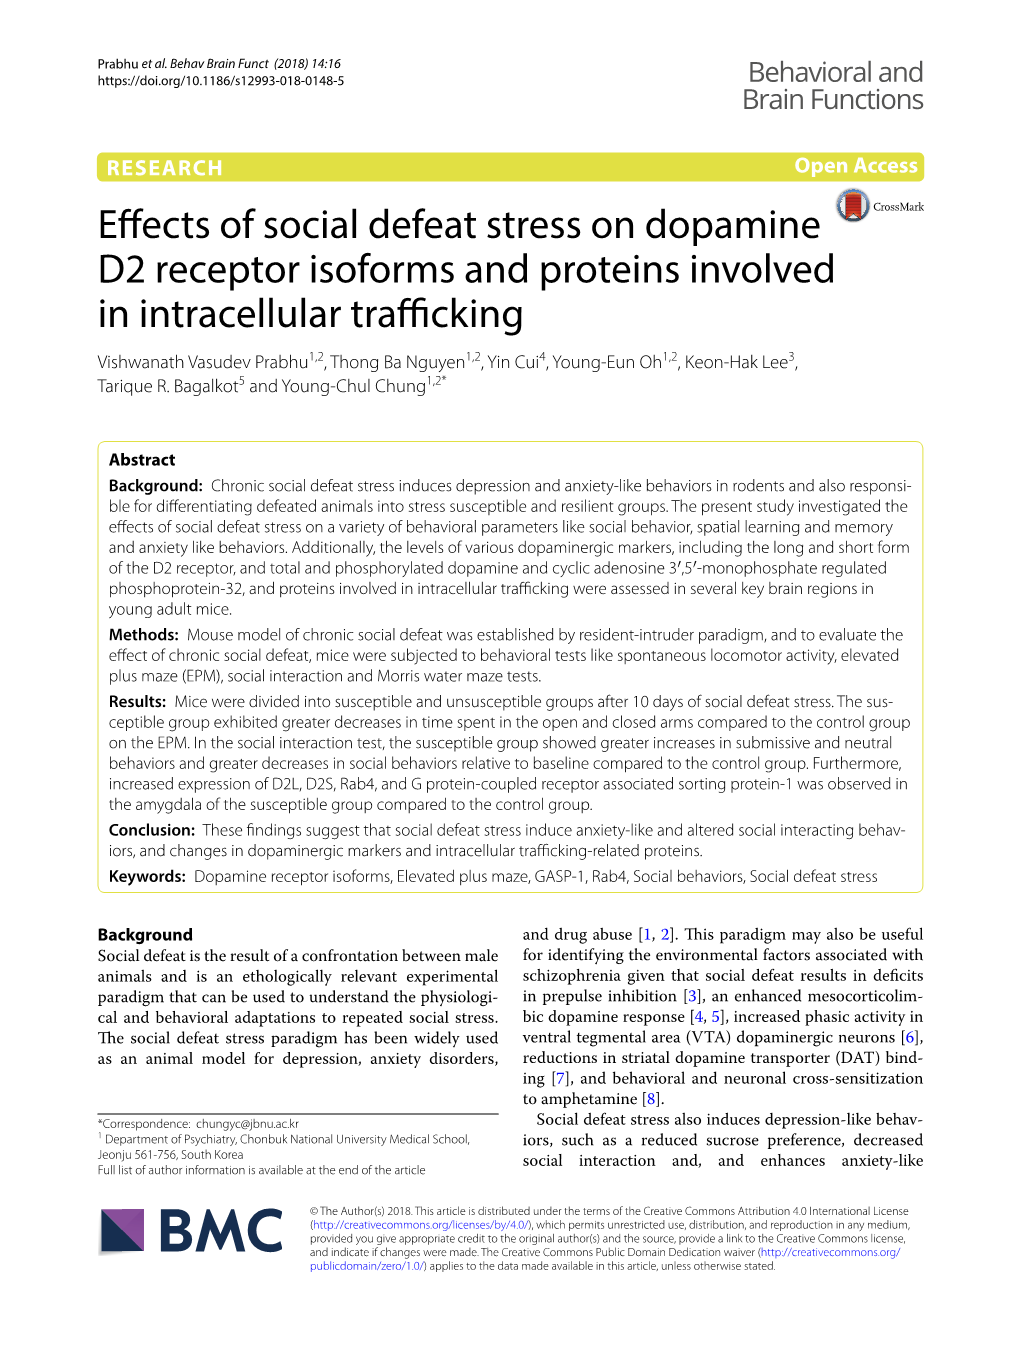 Effects of Social Defeat Stress on Dopamine D2 Receptor Isoforms And